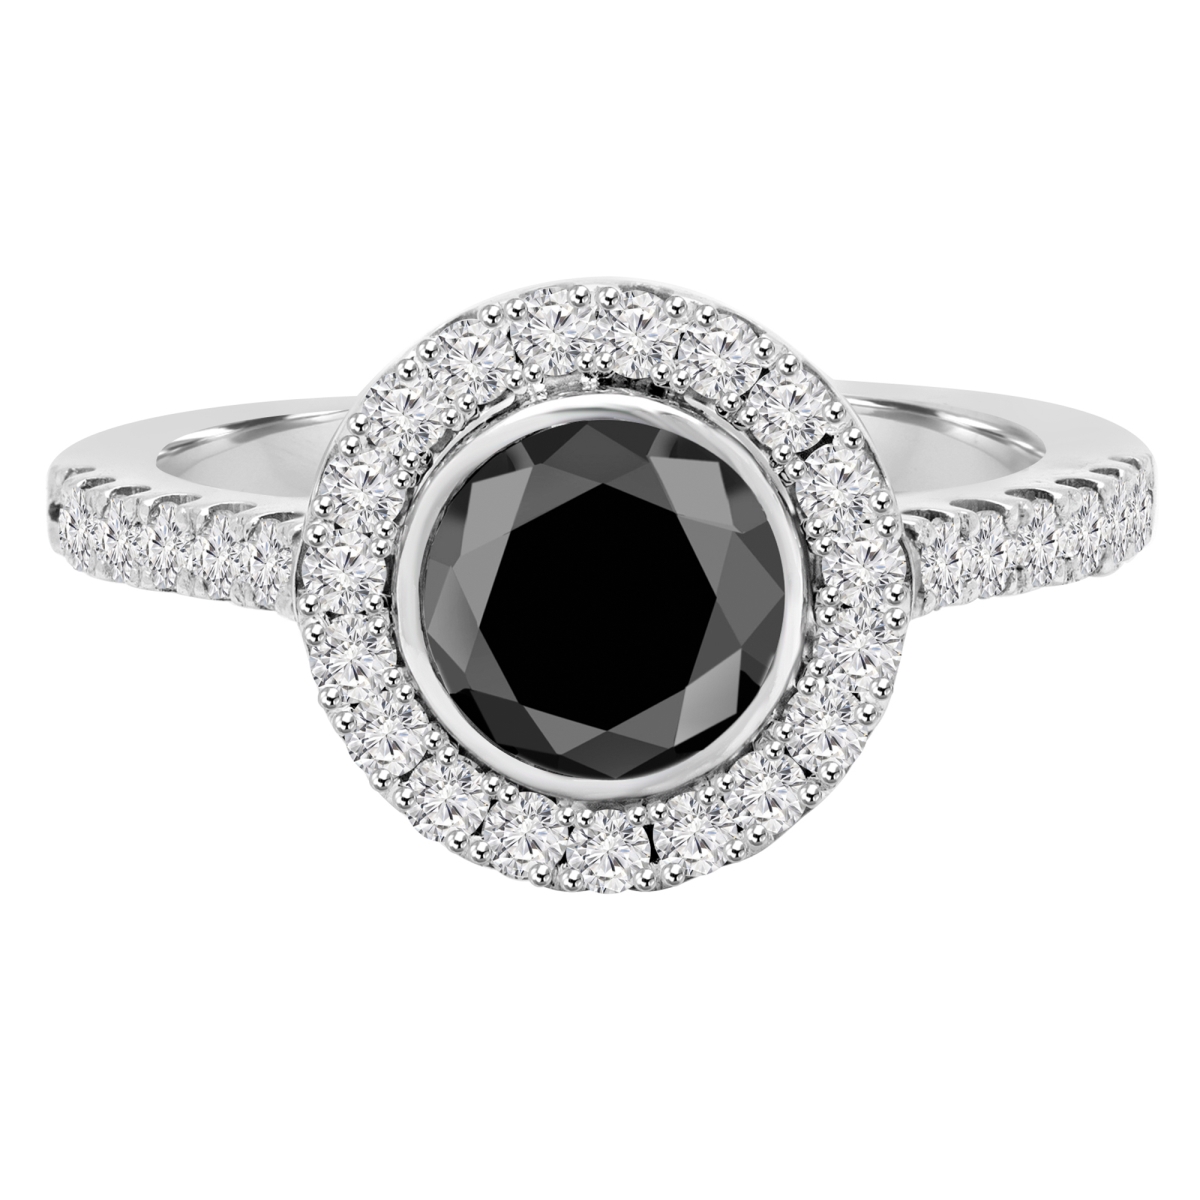 MD190288-5.5 2 CTW Round Black Diamond Bezel Set Halo Engagement Ring in 14K White Gold with Accents - Size 5.5 -  Majesty Diamonds